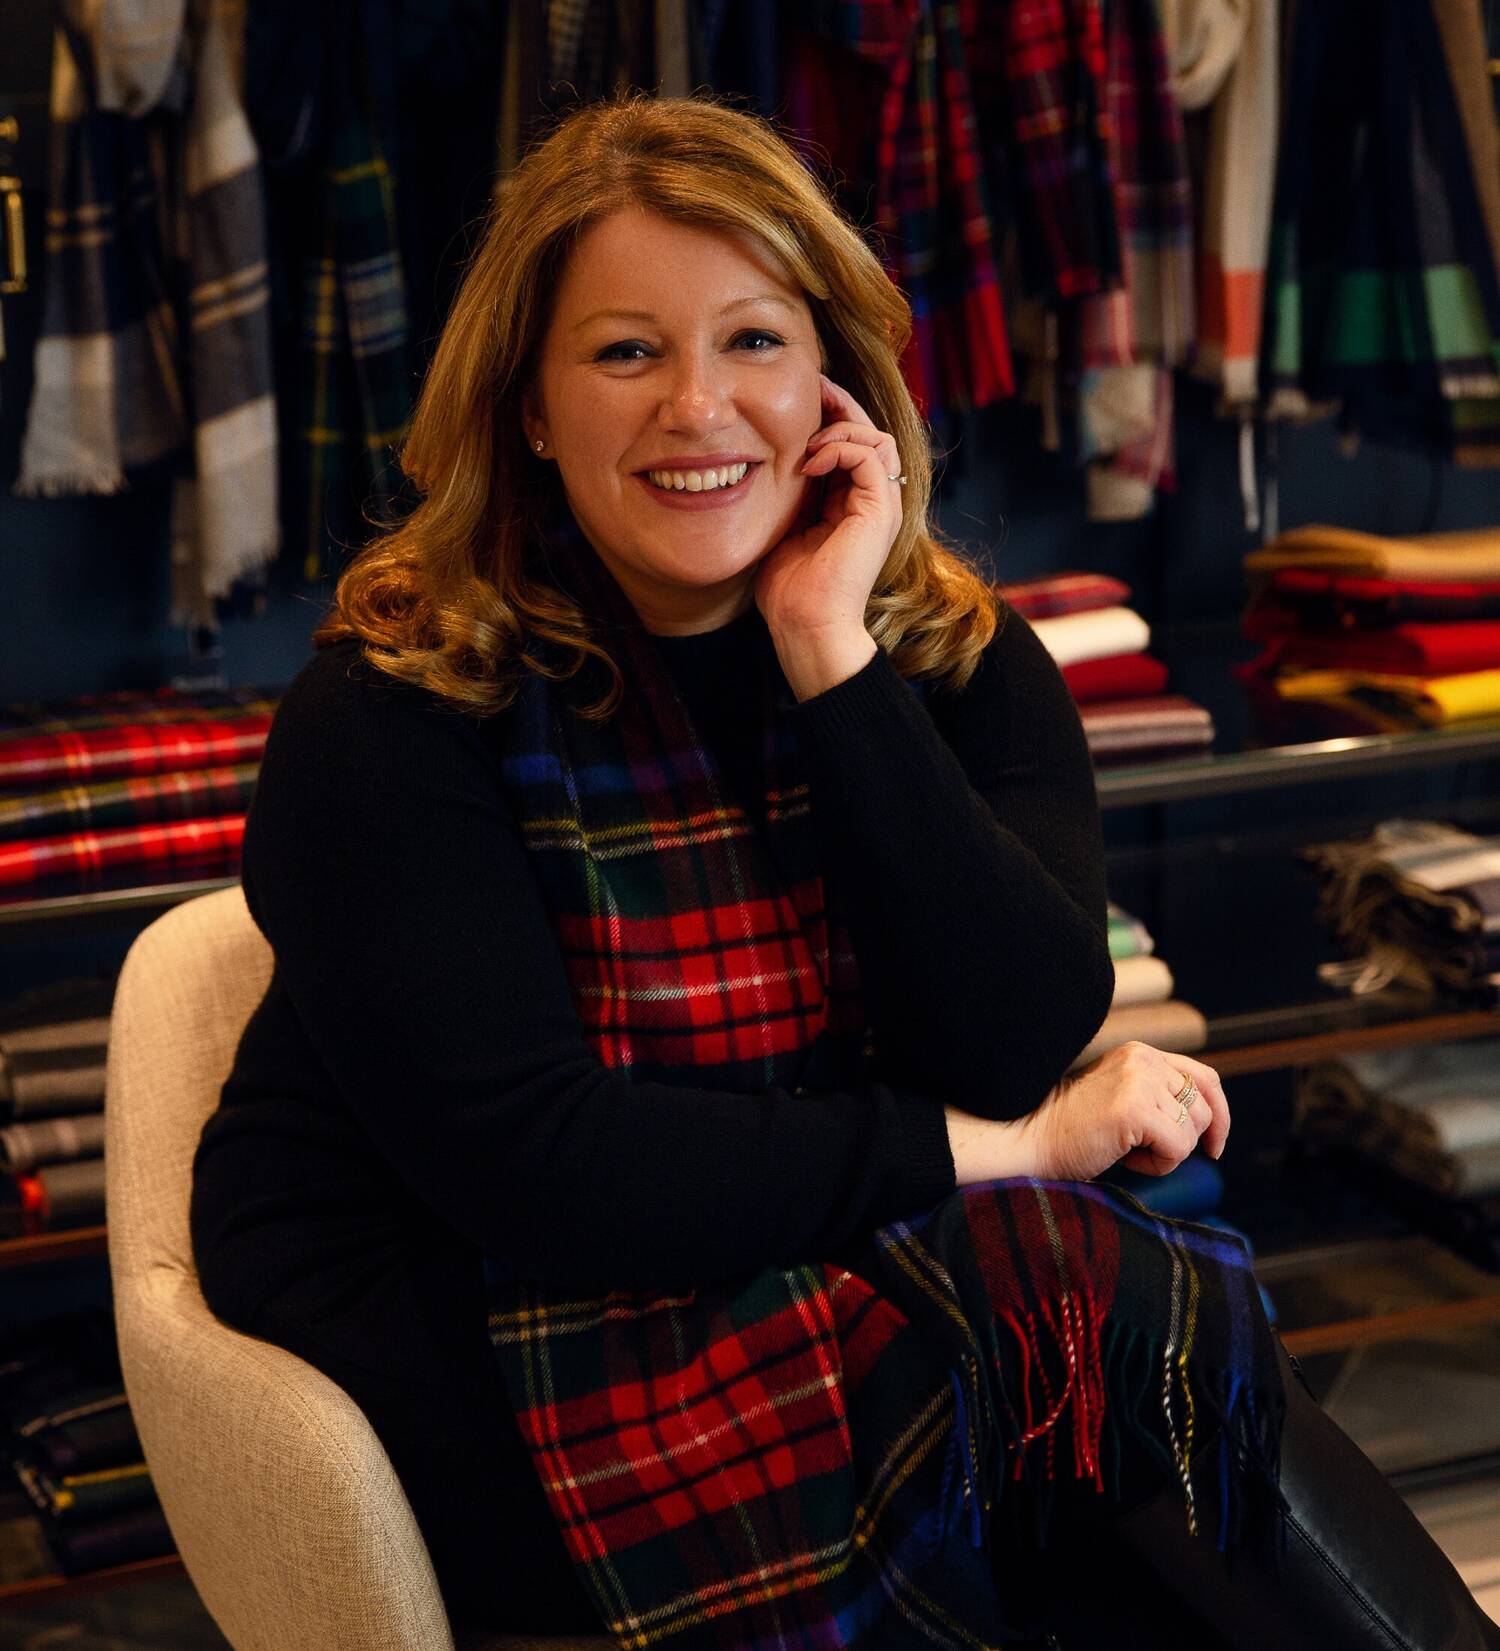 A smiling woman is sitting on a chair, wearing a tartan shawl.